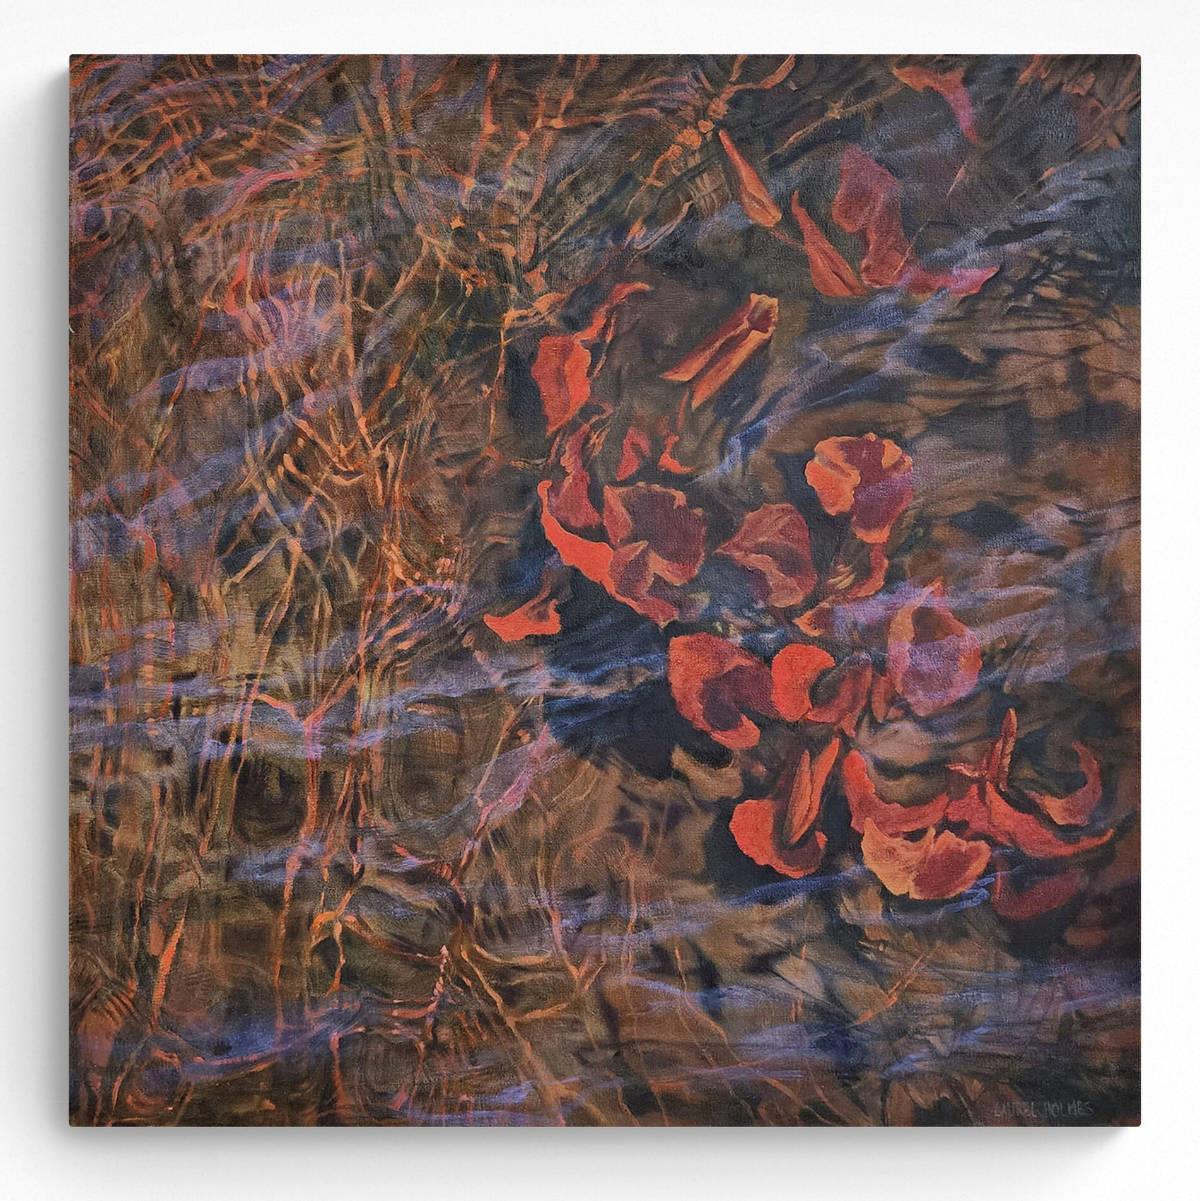 oil painting of red waterlilies in a swirling brown water